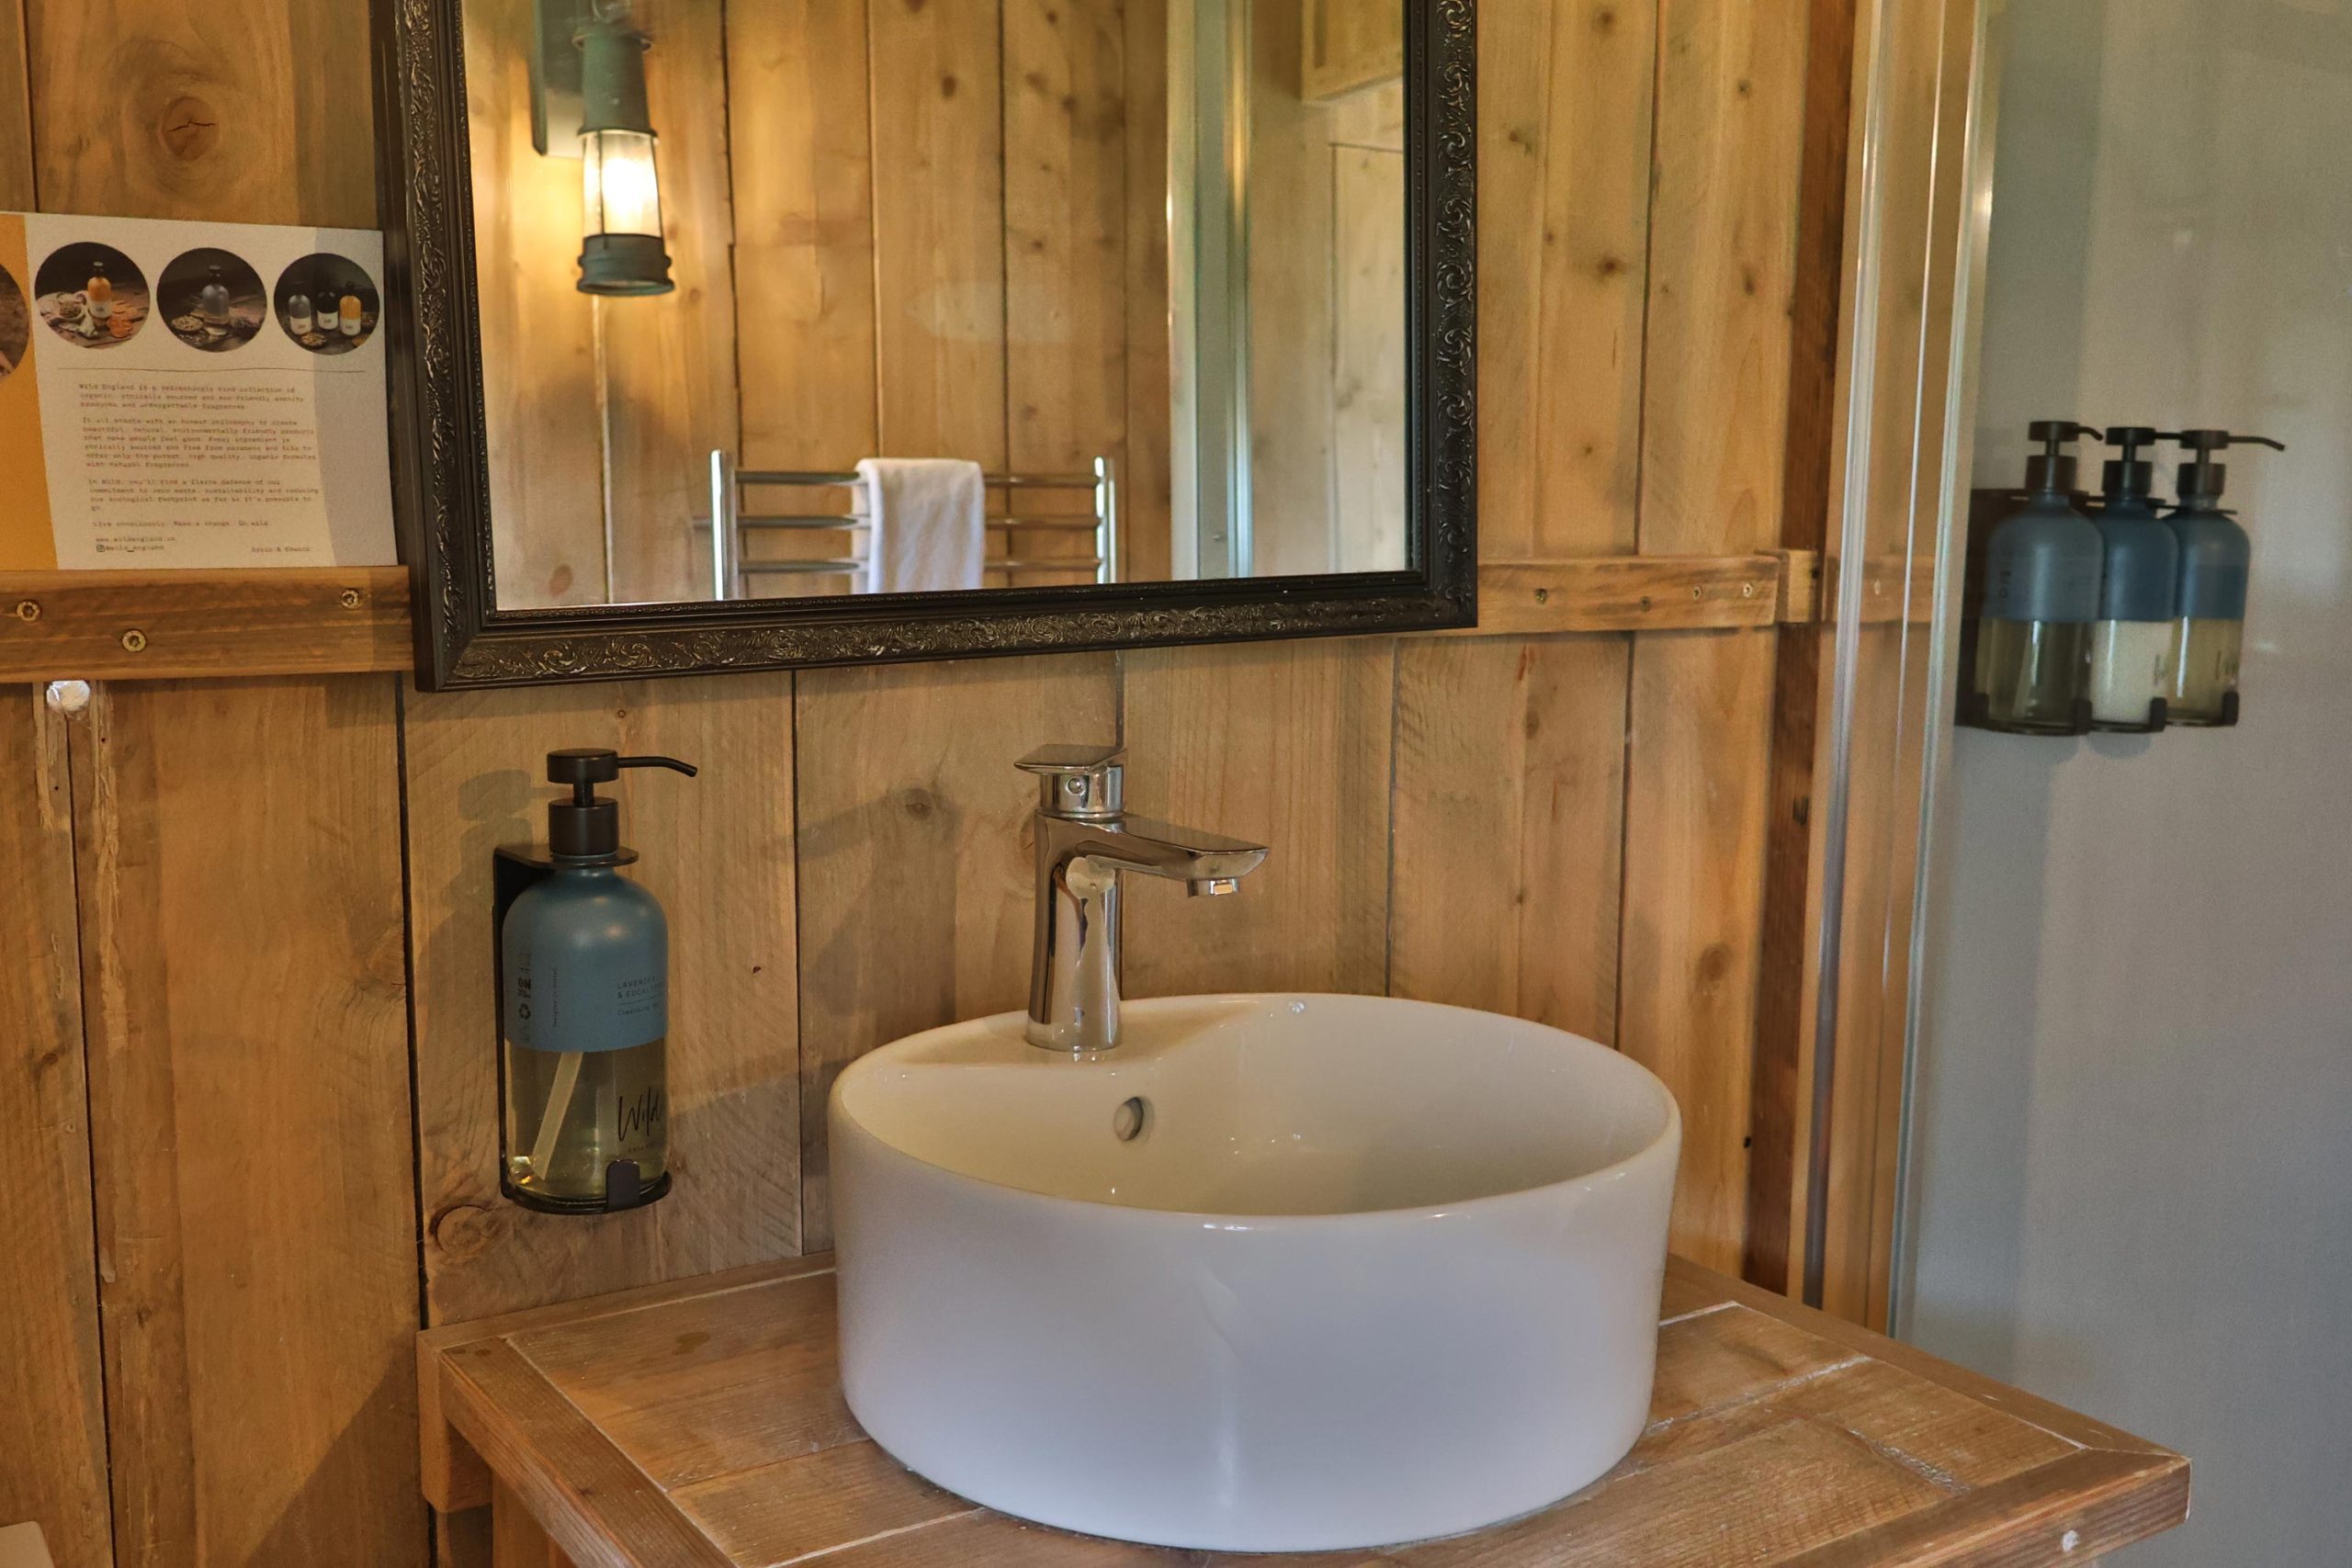 Luxurious wash basin and mirror in wood cladded holiday cabin.